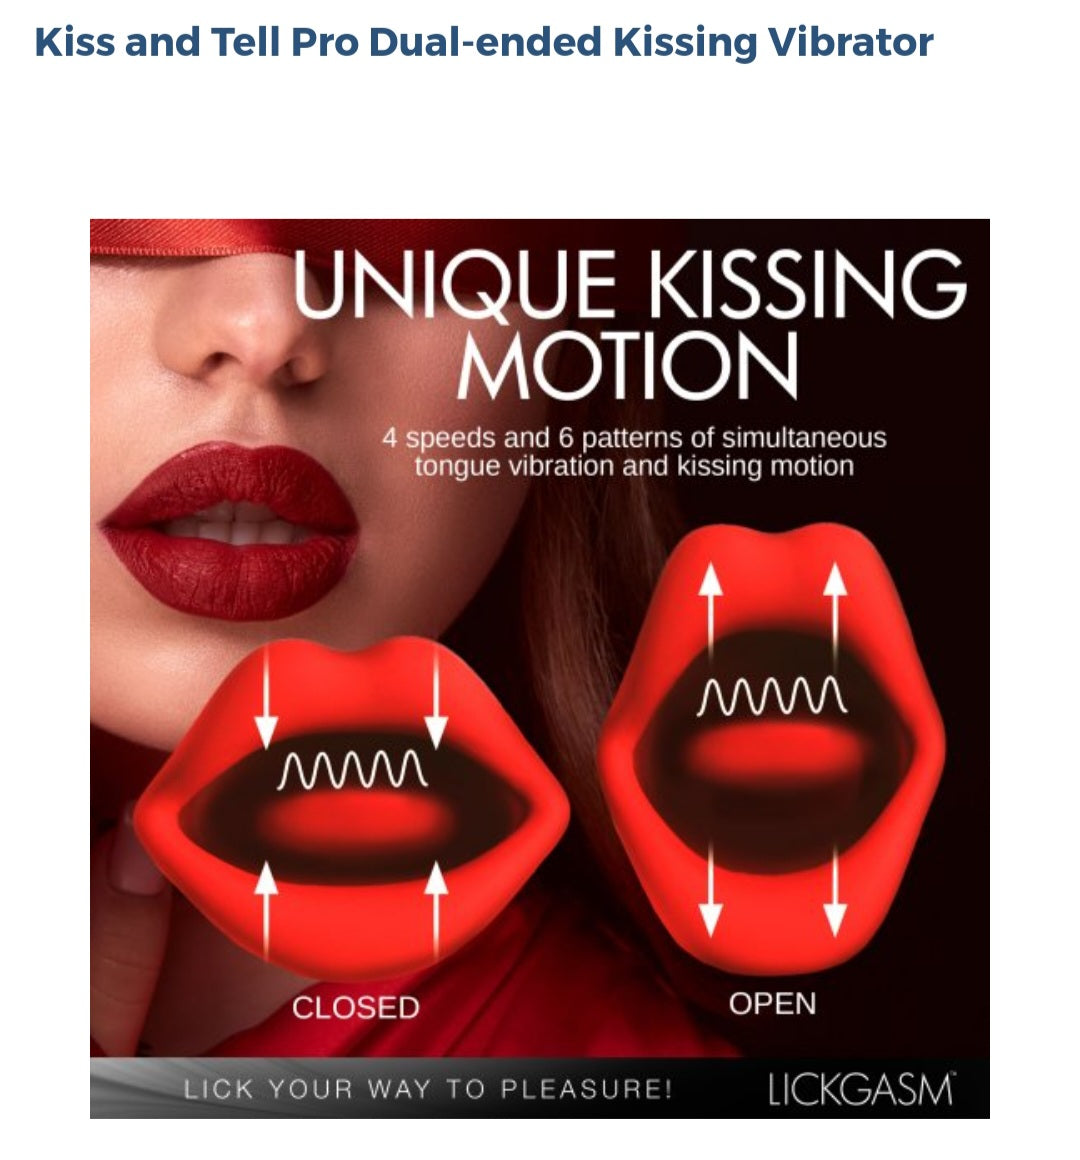 Kiss And Tell Pro Dual-Ended Kissing Vibrator